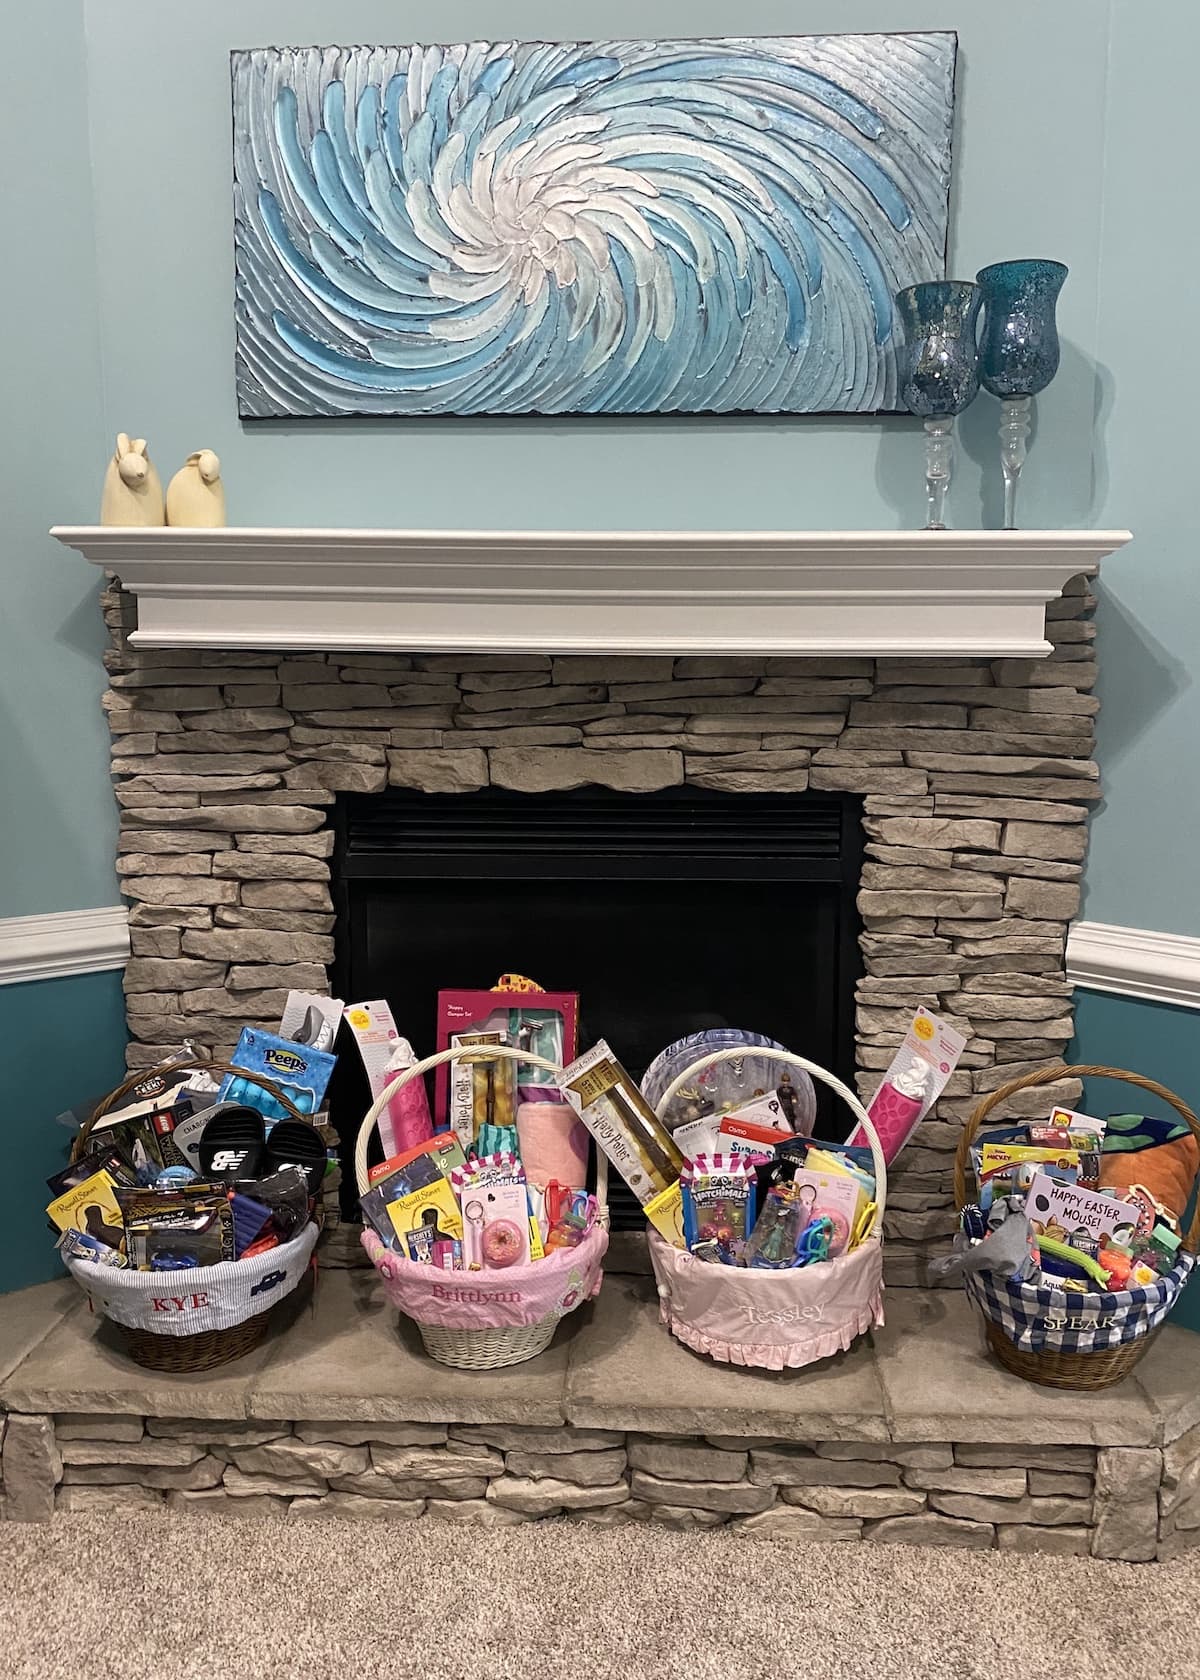 Looking for the best Easter baskets for kids? Here are my top picks for Easter baskets for boys and girls that everyone will love!